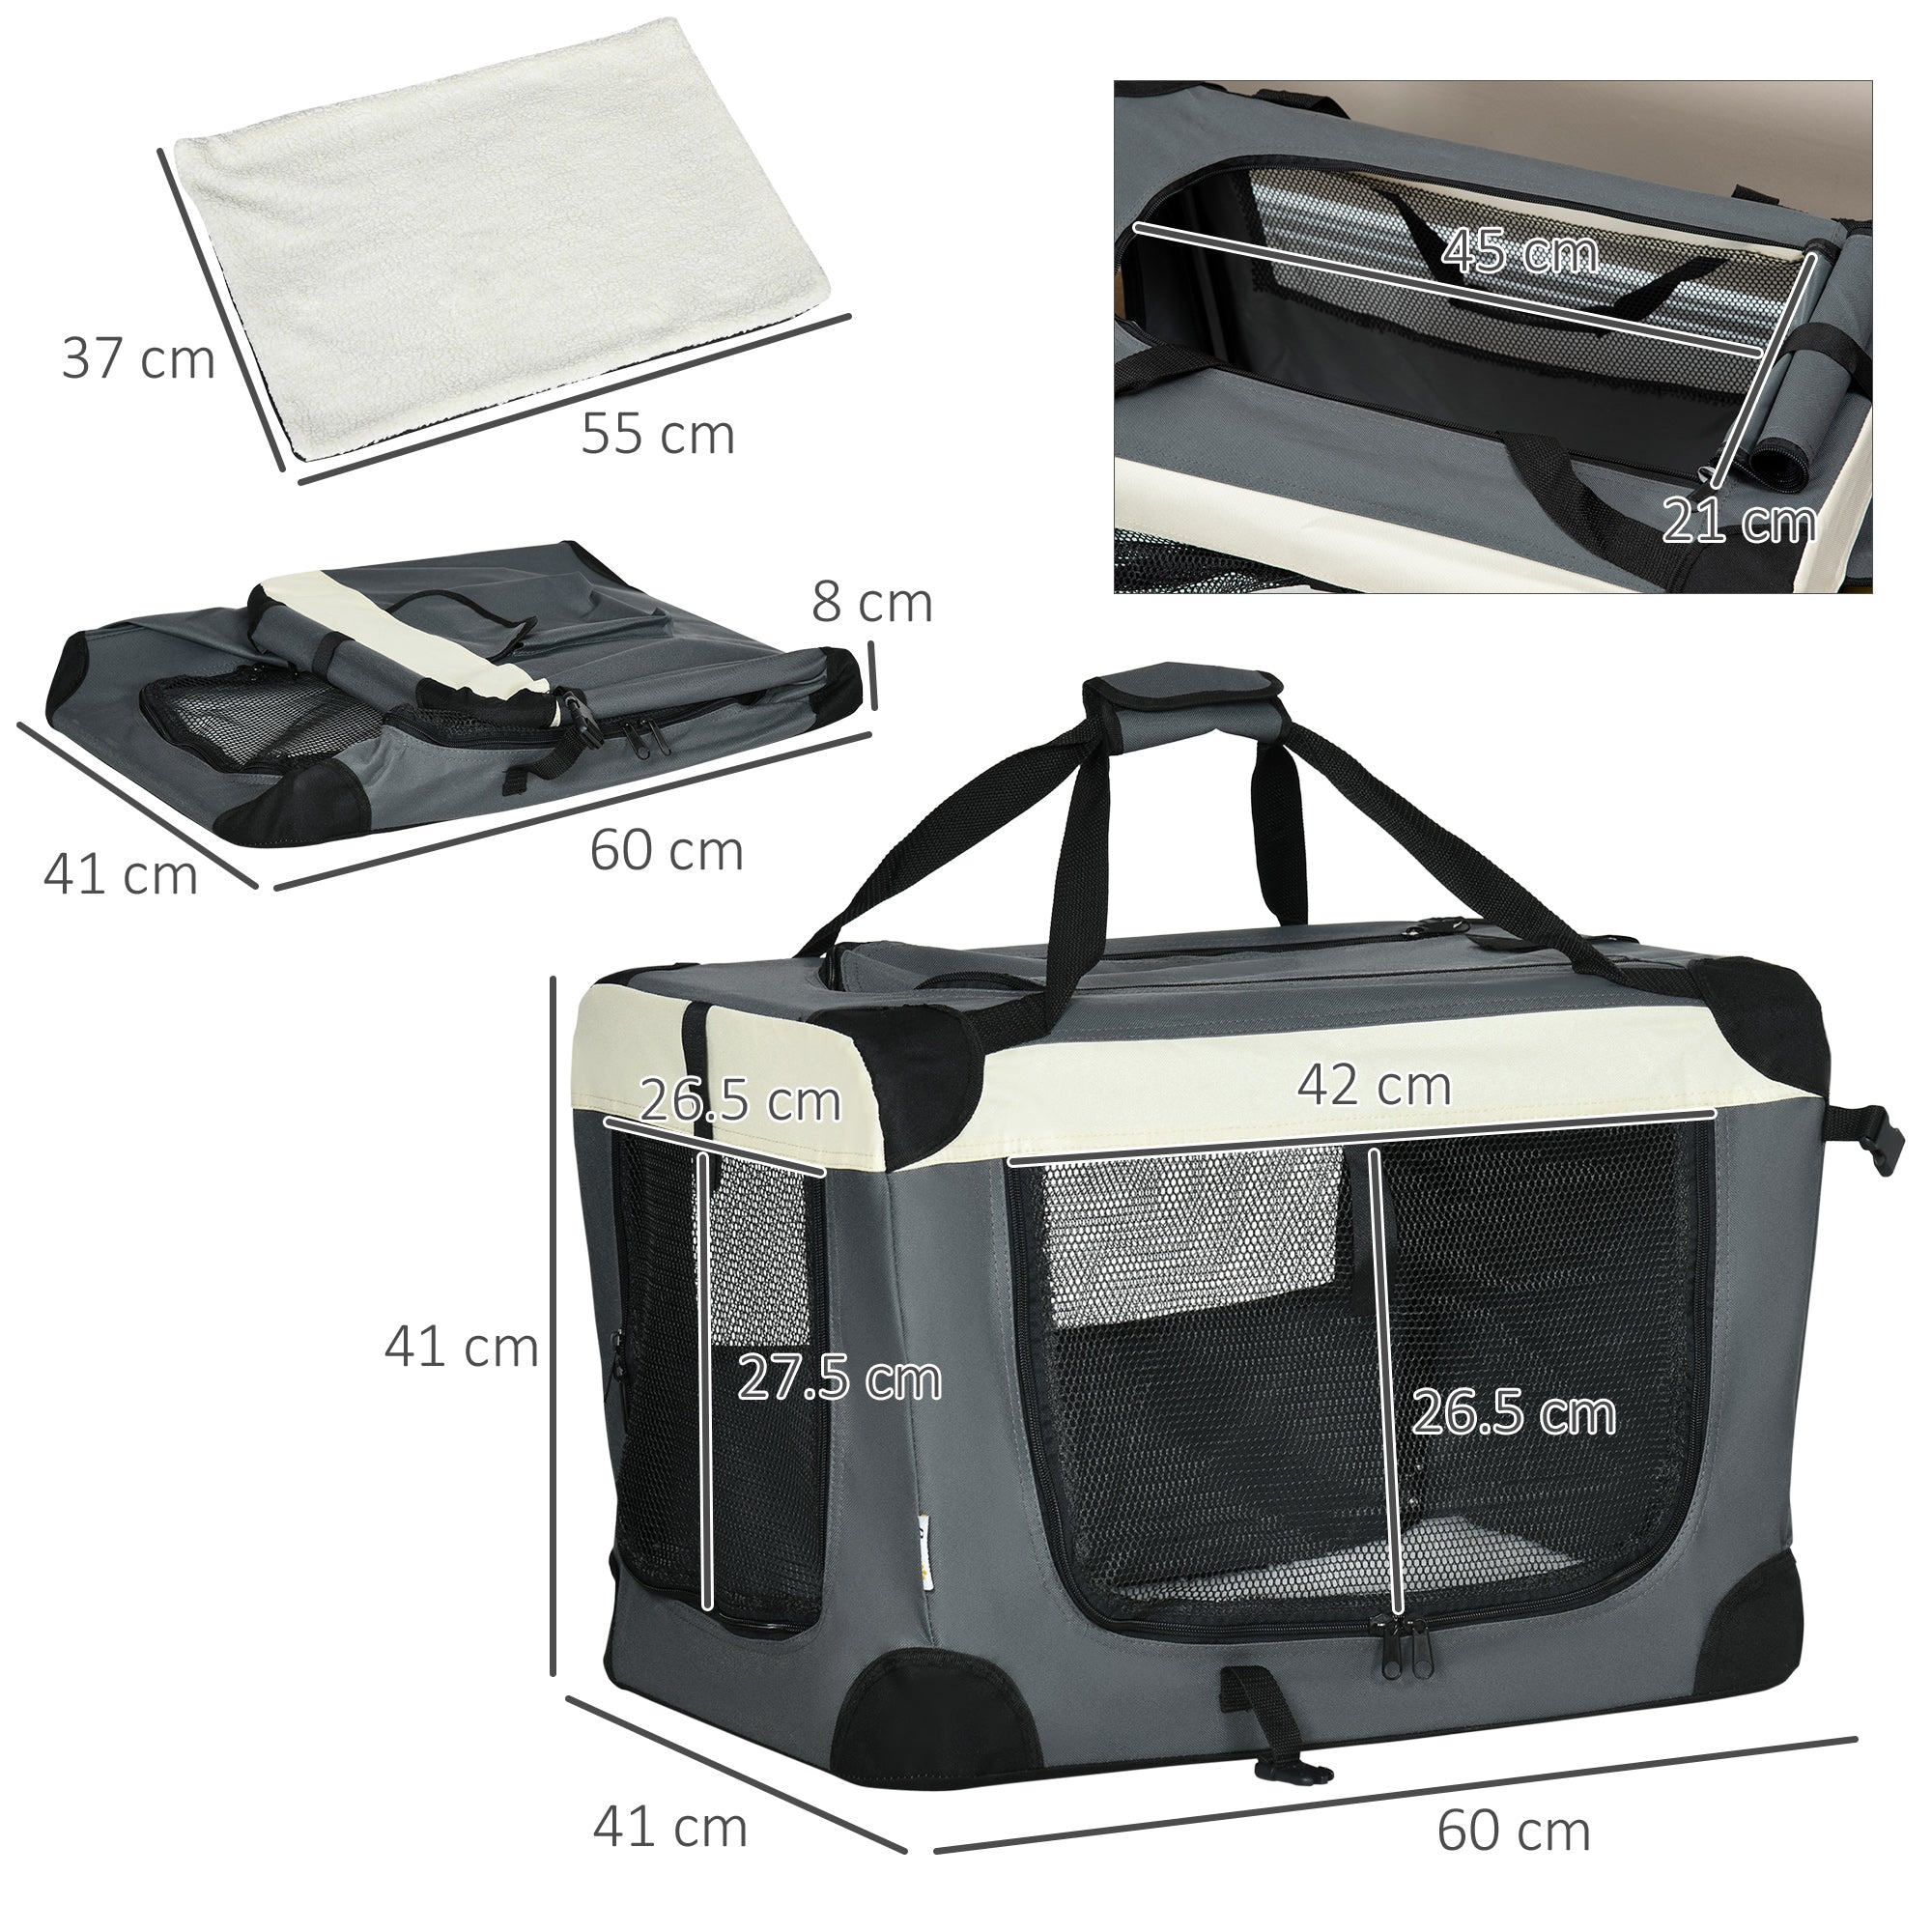 60cm Foldable Pet Carrier, with Cushion, for Miniature Dogs and Cats - Grey-2